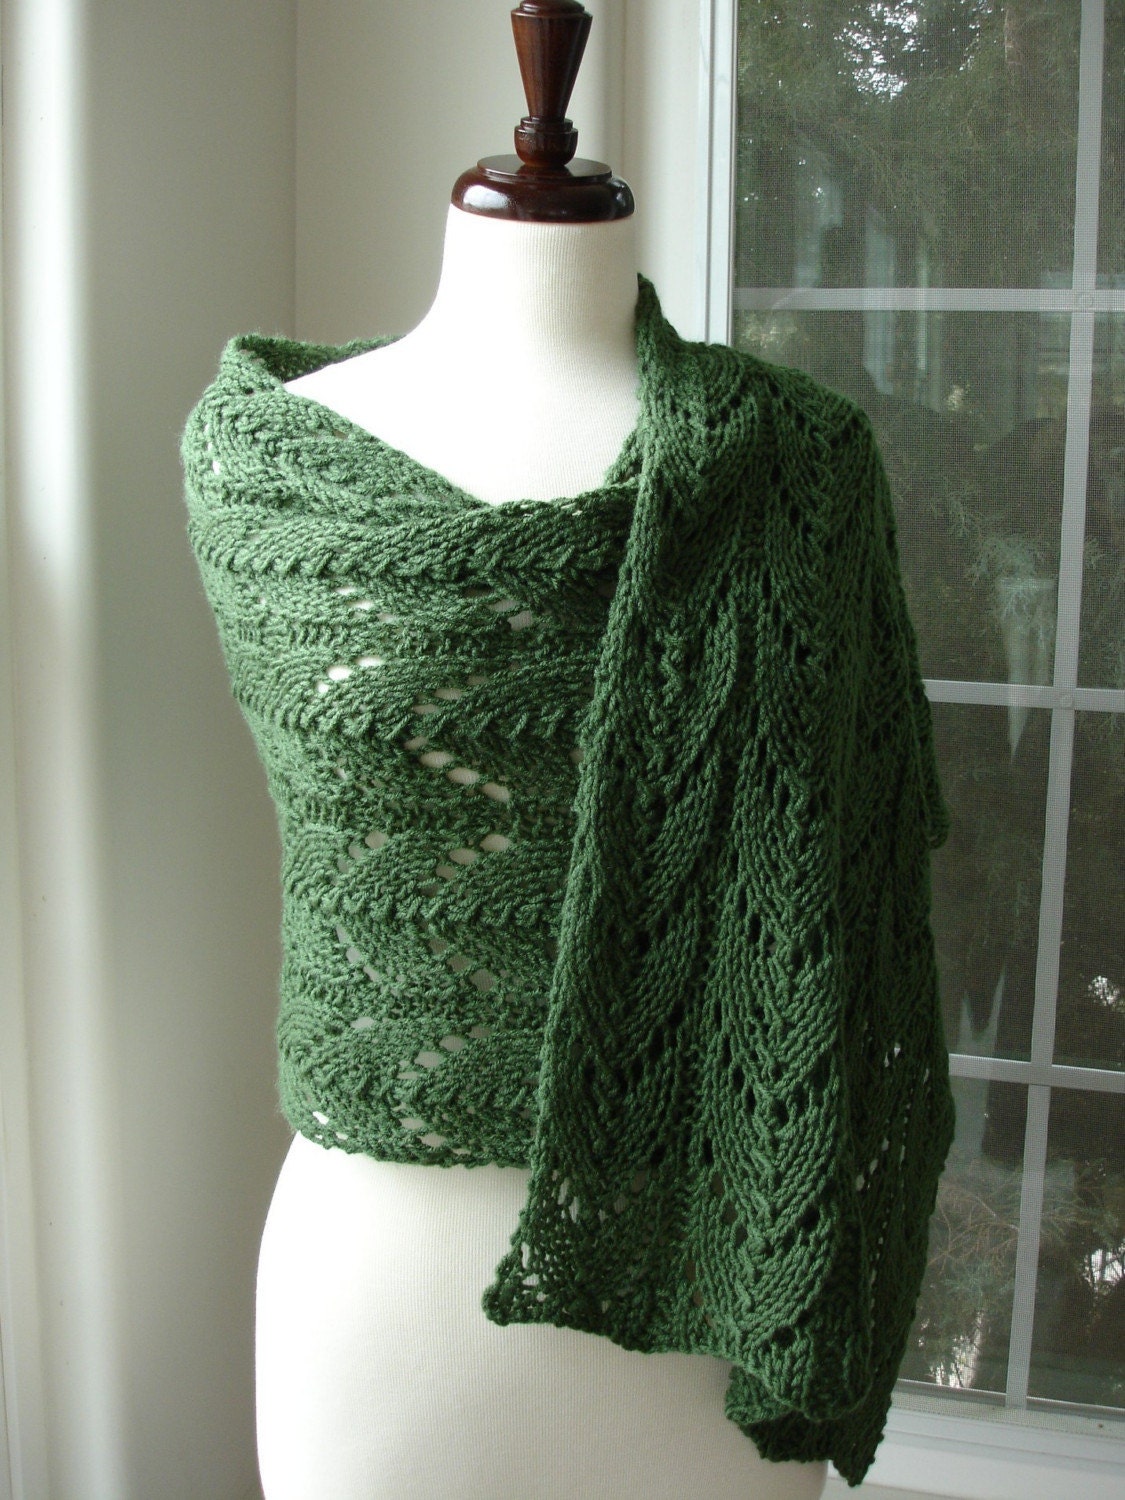 Hand knit lace Shawl in beautiful Thyme Green